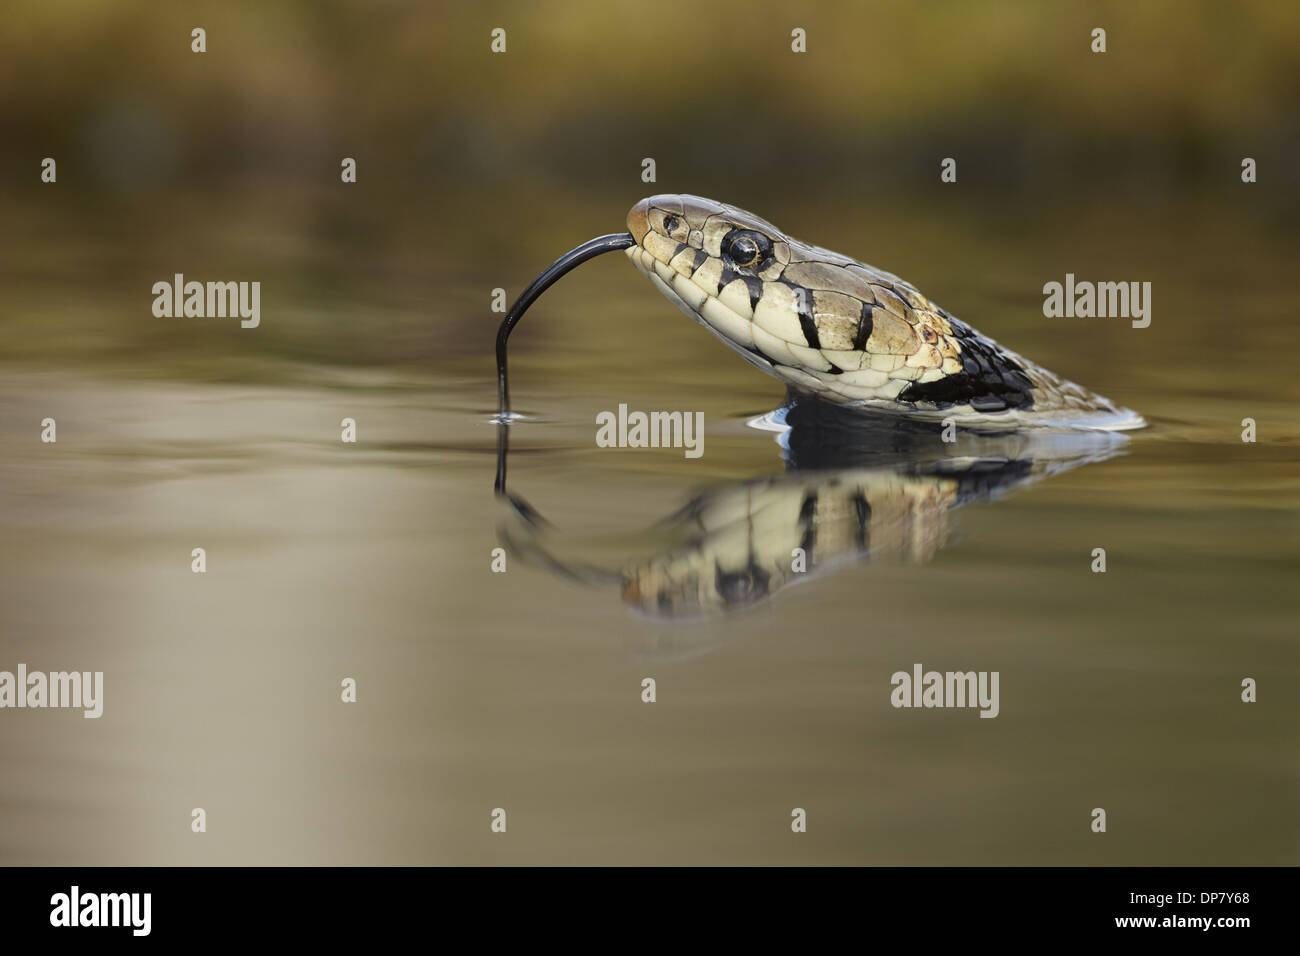 Grass Snake (Natrix natrix) adult head at surface of water flicking forked tongue swimming across pool with reflection Stock Photo